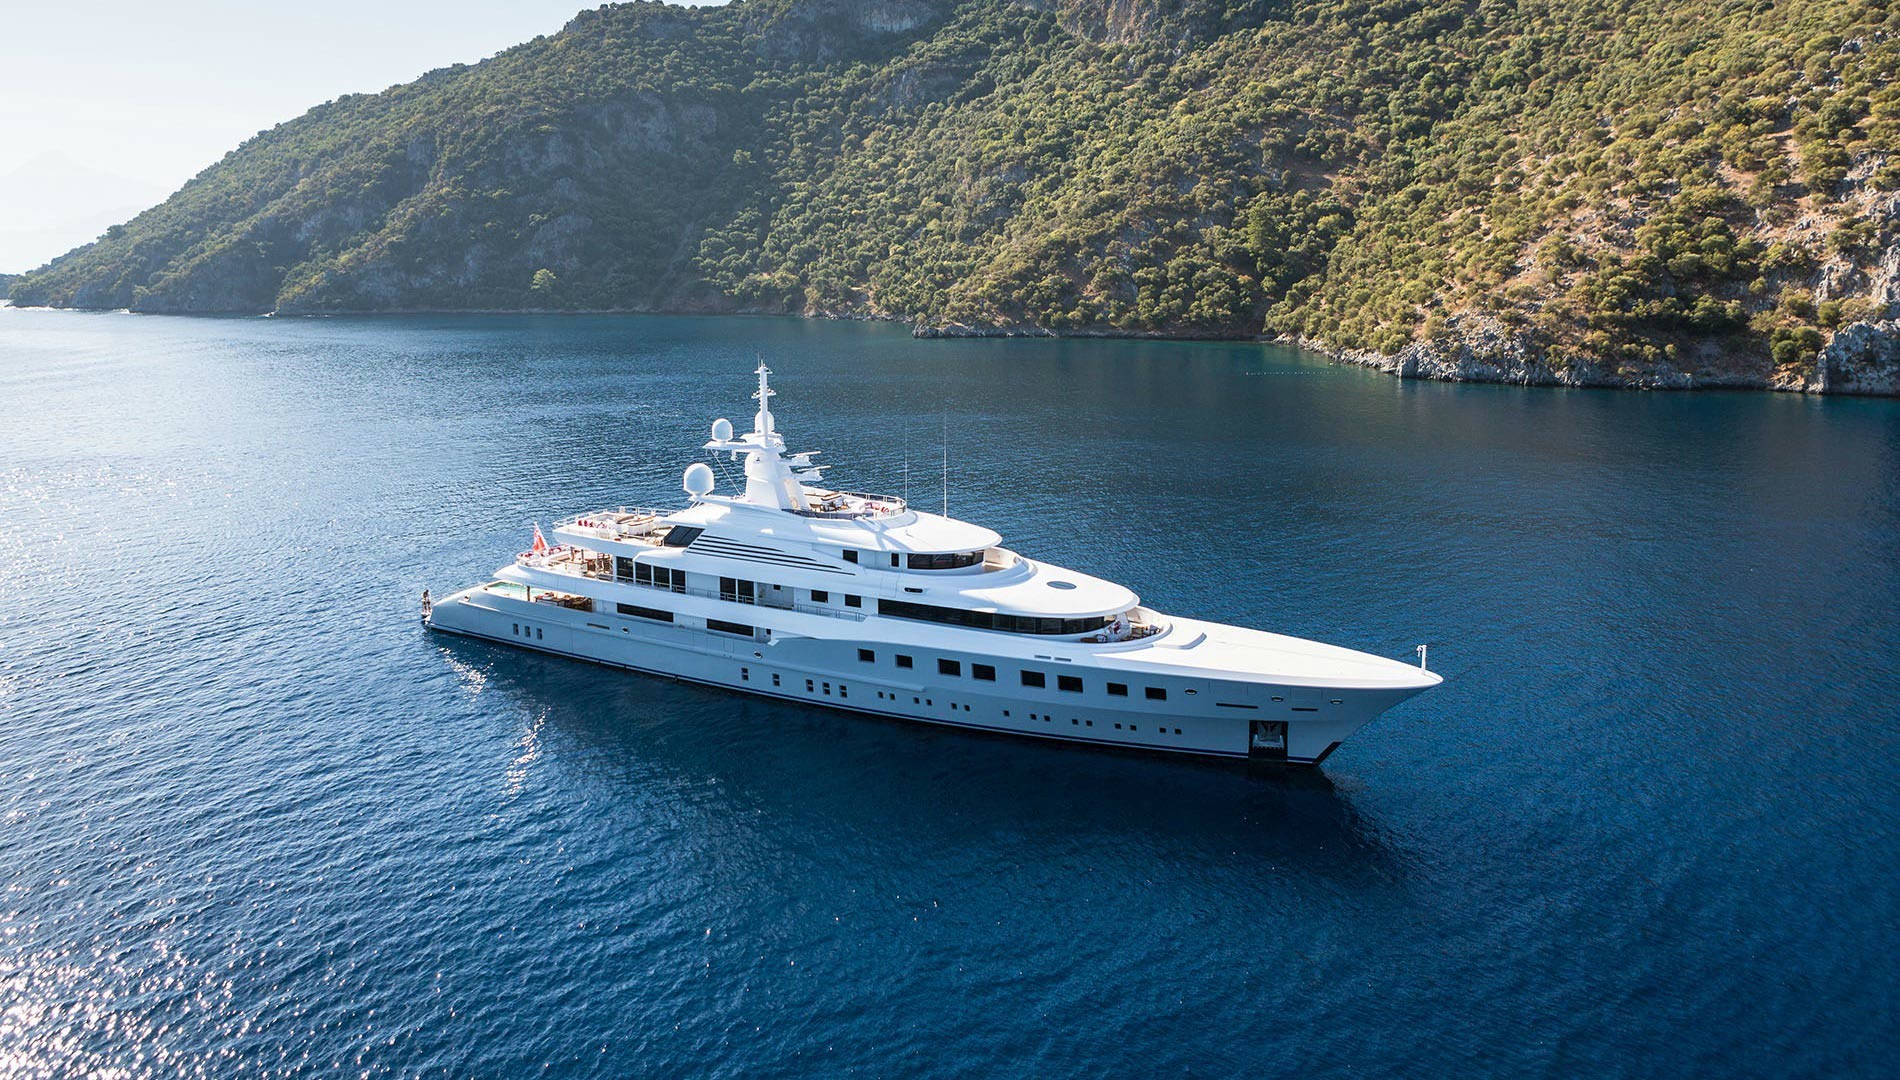 Superyachts aim to go green — but at what cost?